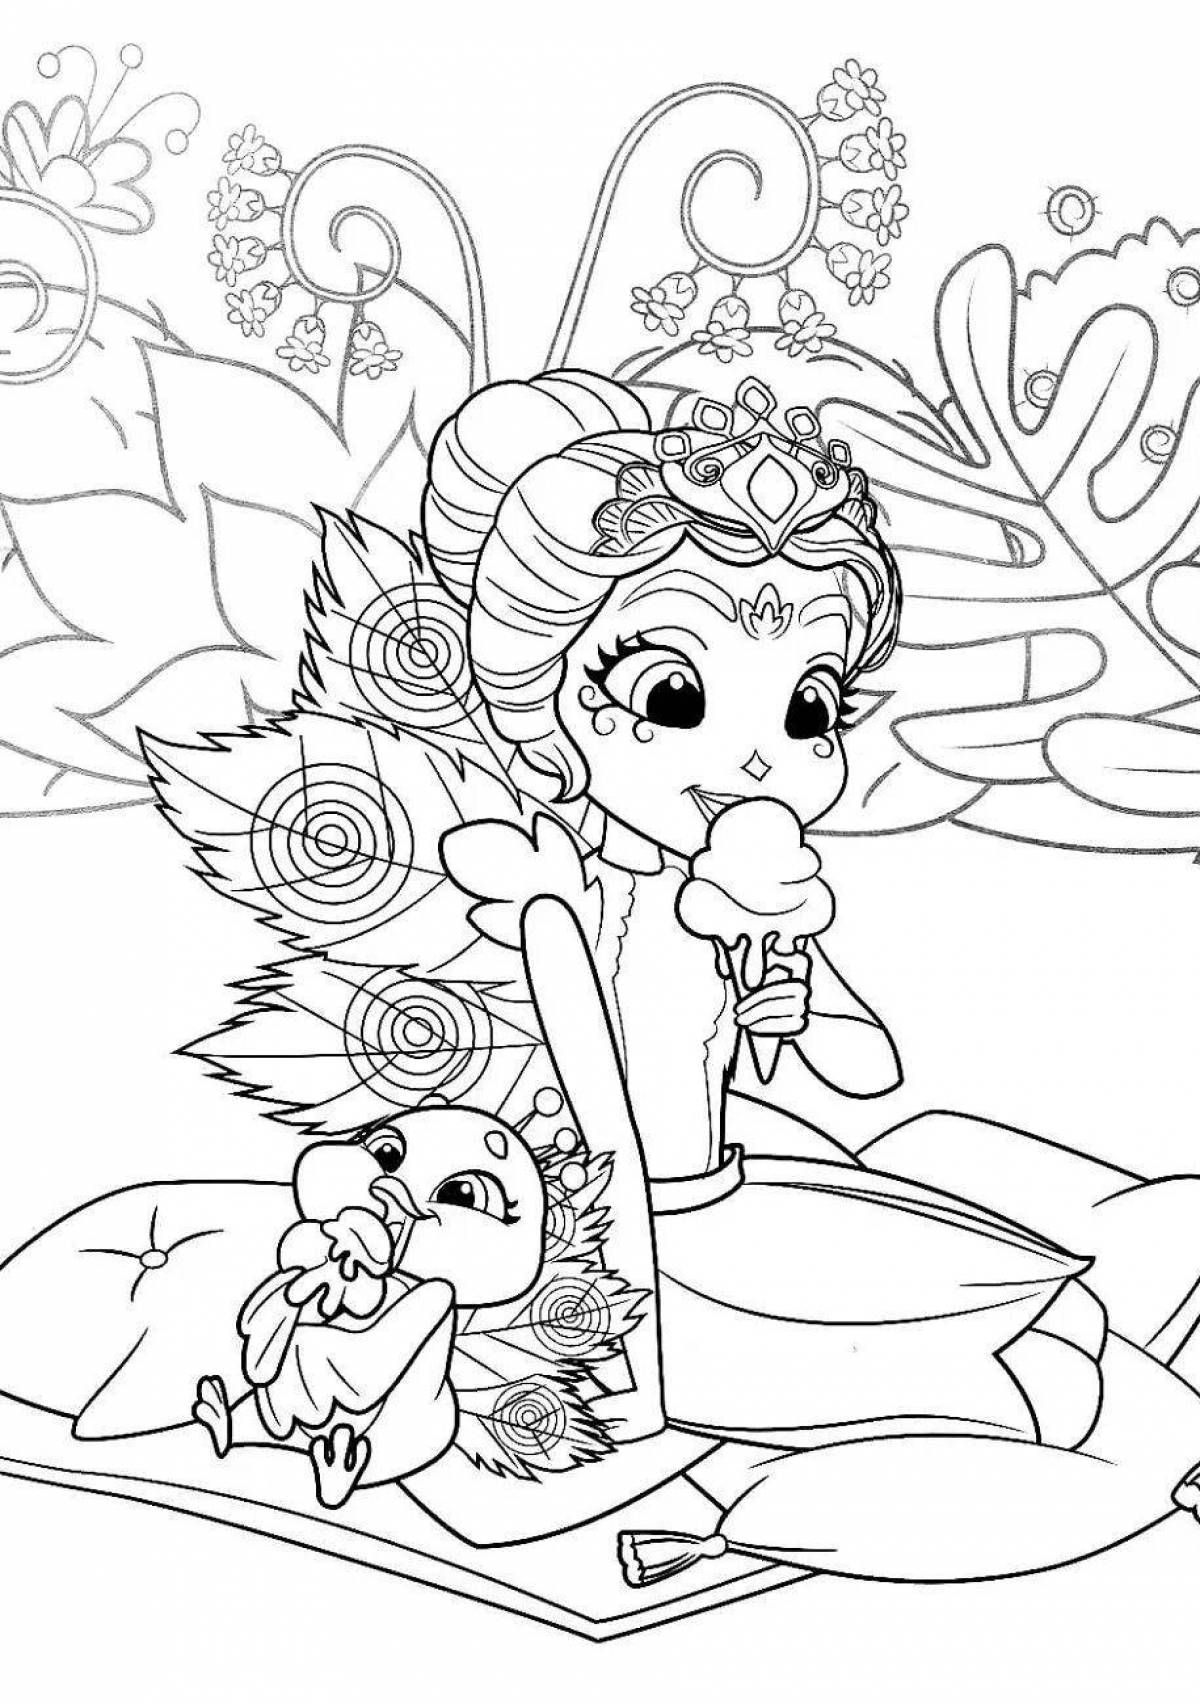 Sparkling enchenchimals coloring pages